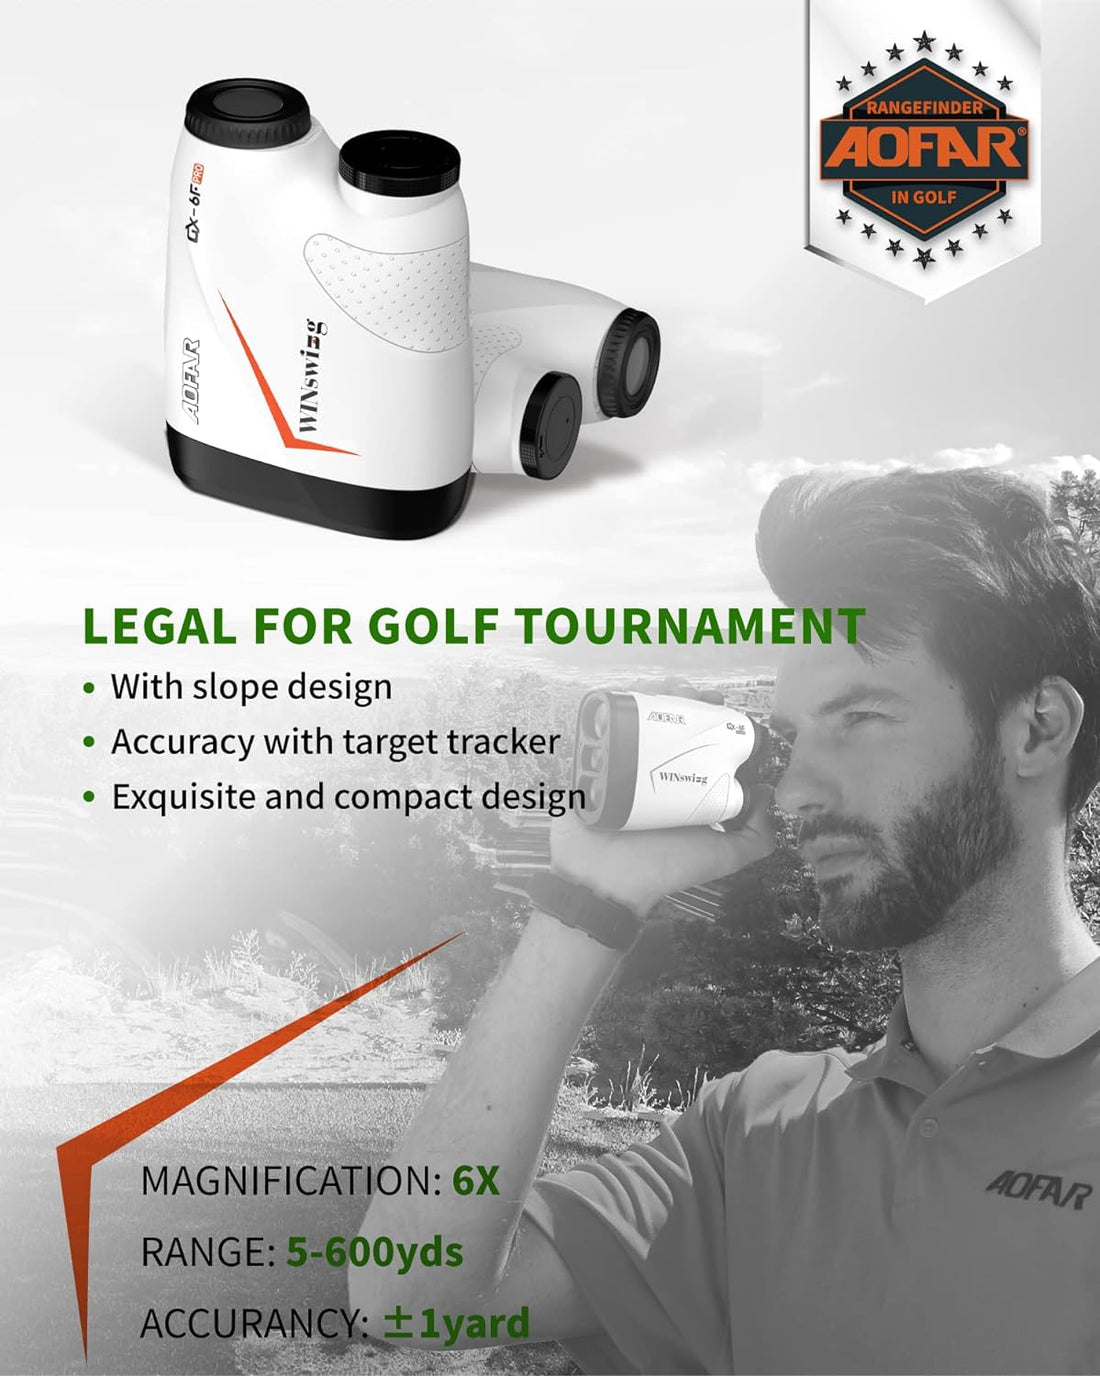 AOFAR Range Finder Golf GX-6F, Flag Lock with Pulse Vibration, Tournament Designed, 500 Yards RangeFinder for Distance Measuring with Continuous Scan, High-Precision Accurate Gift for Golfers